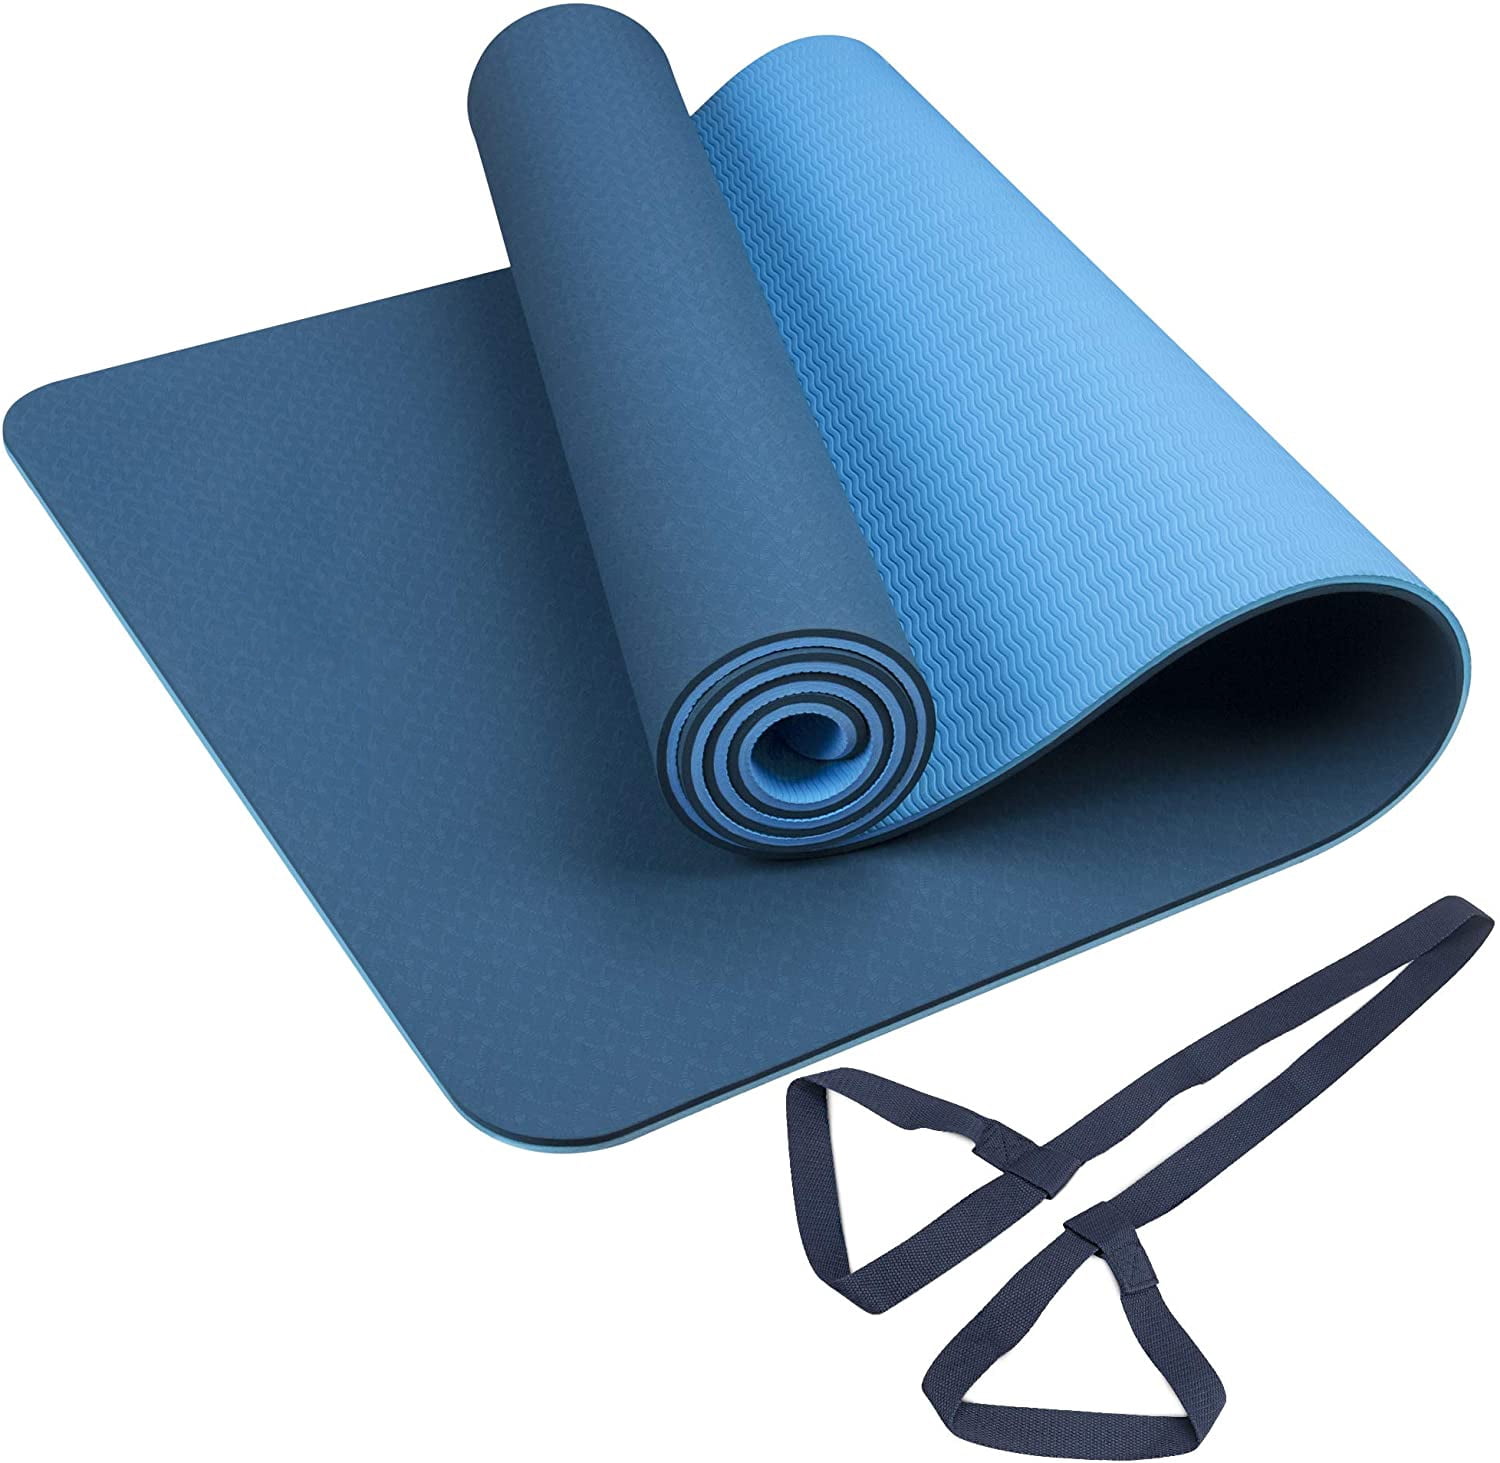 Buy Wholesale China Professional 1/3 Inch Extra Thick Yoga Mat